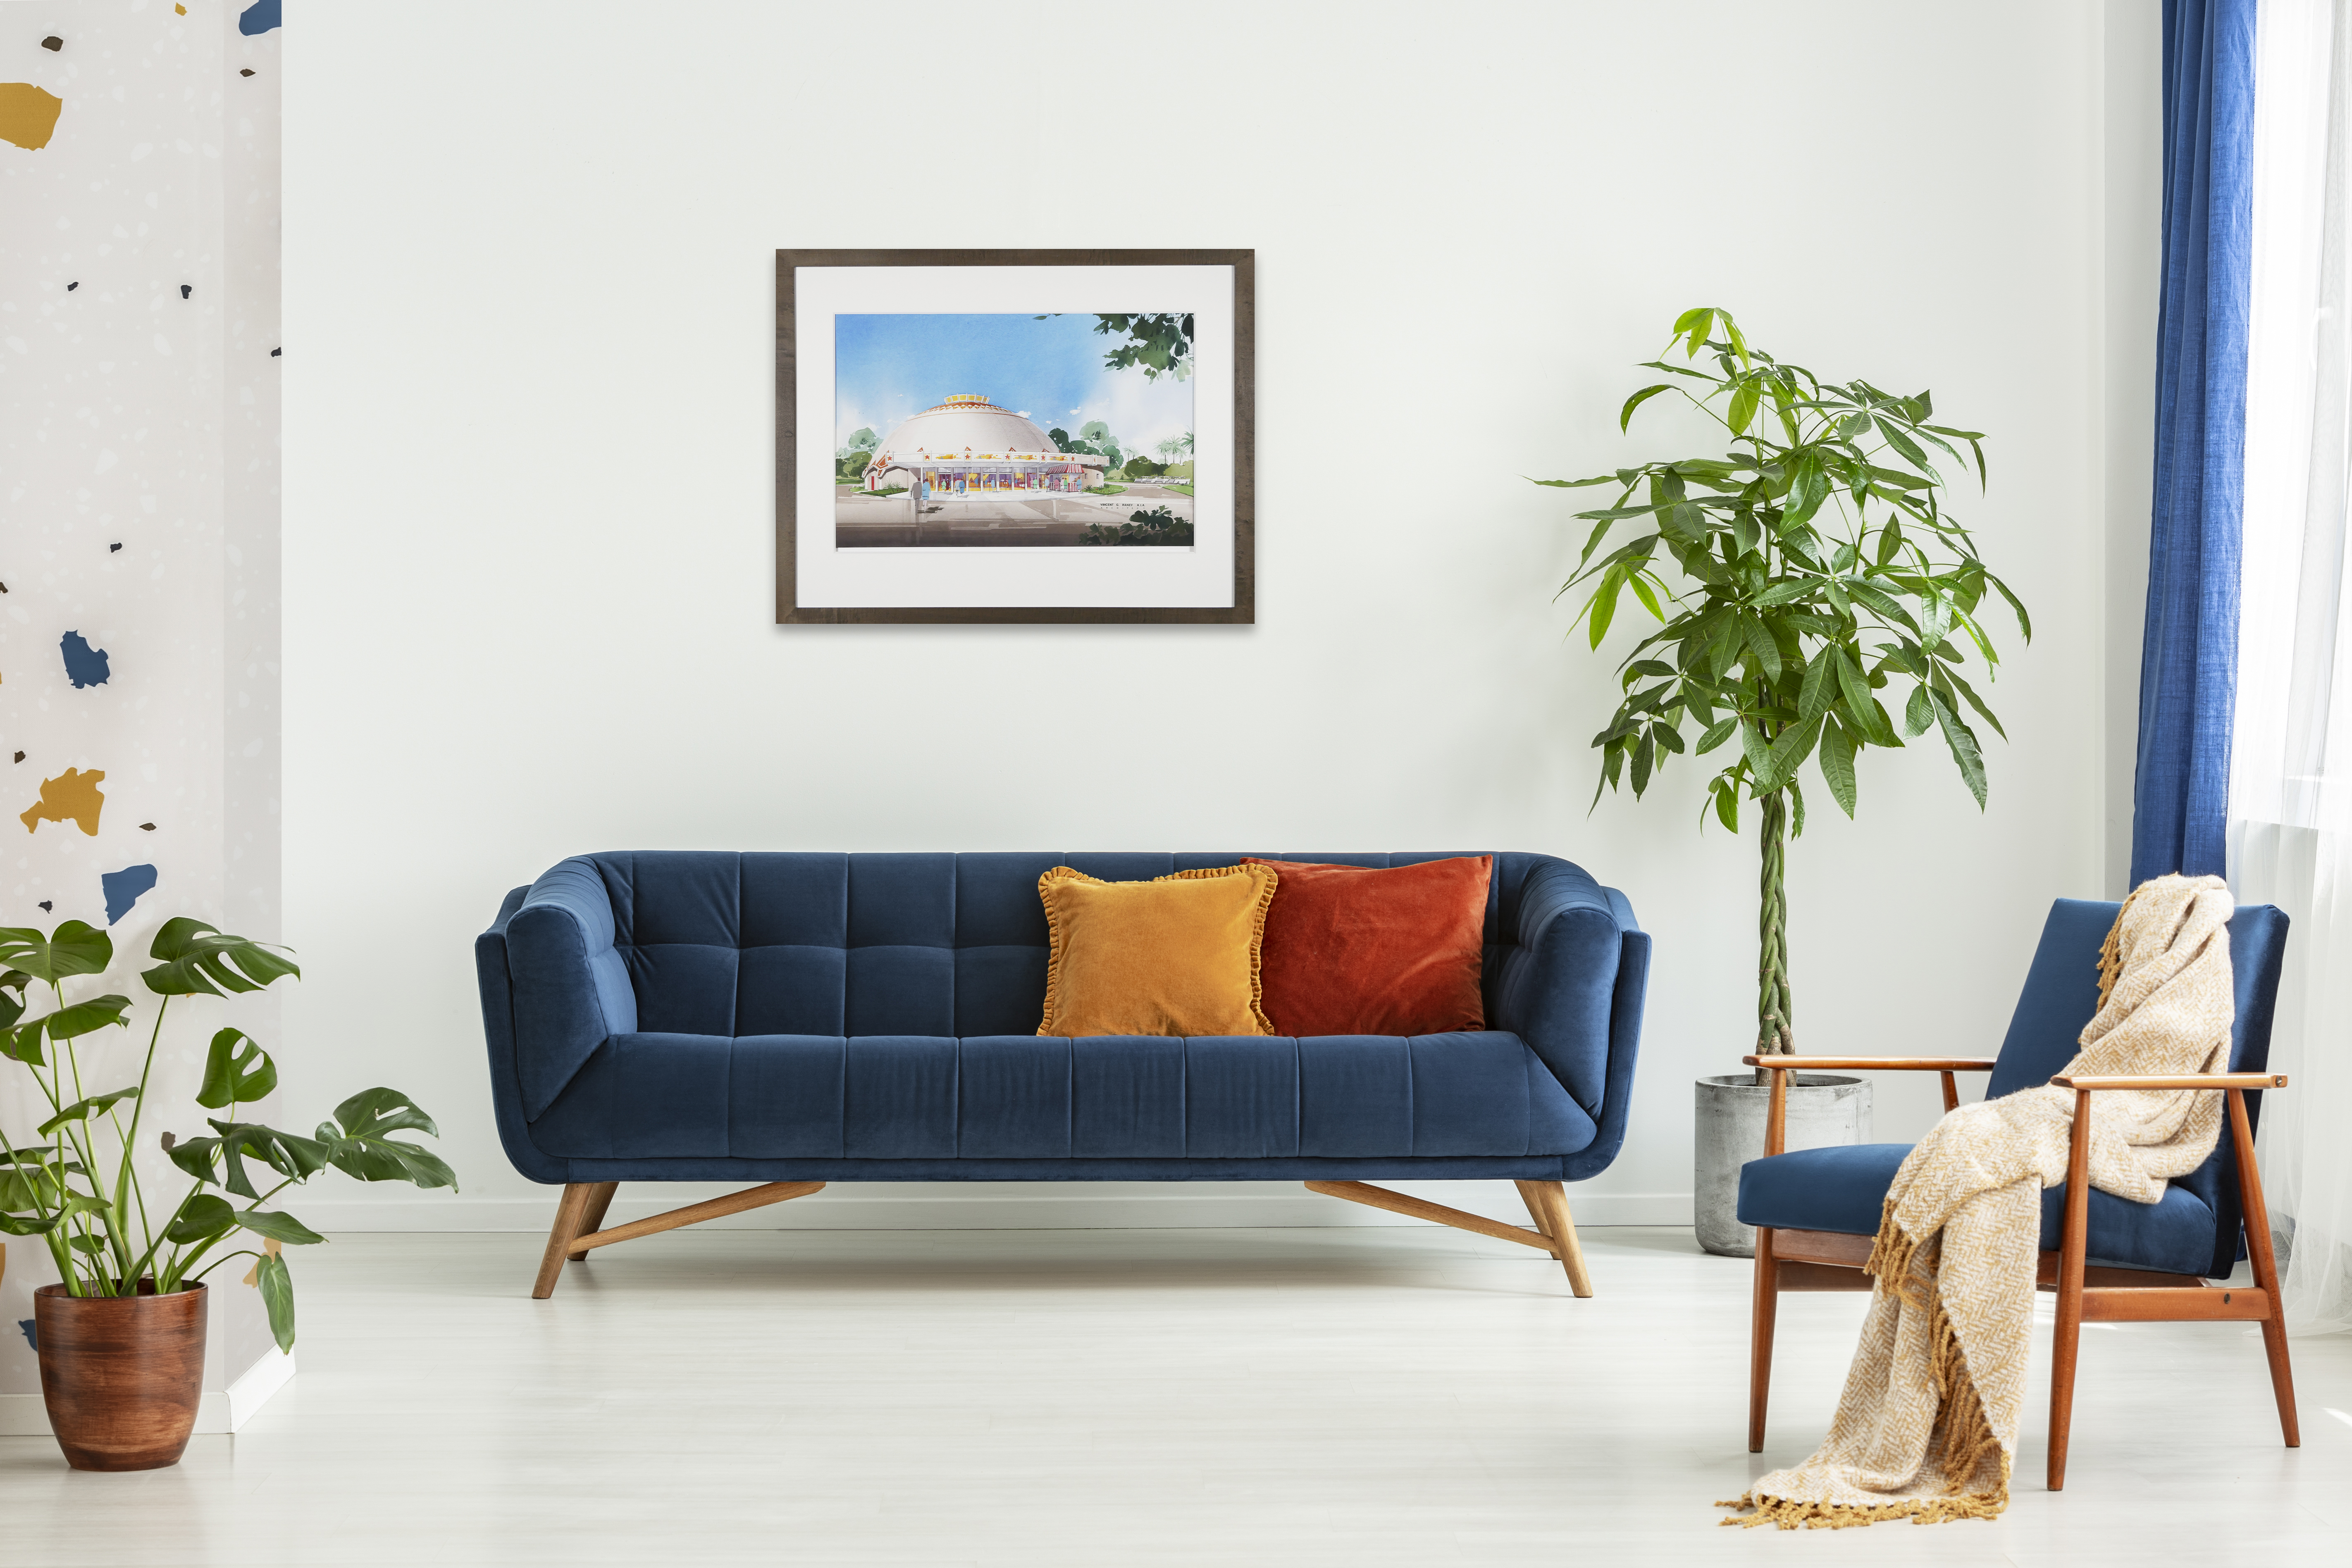 Mid-century modern chair with a blanket and a large sofa with colorful cushions in a spacious living room interior with green plant